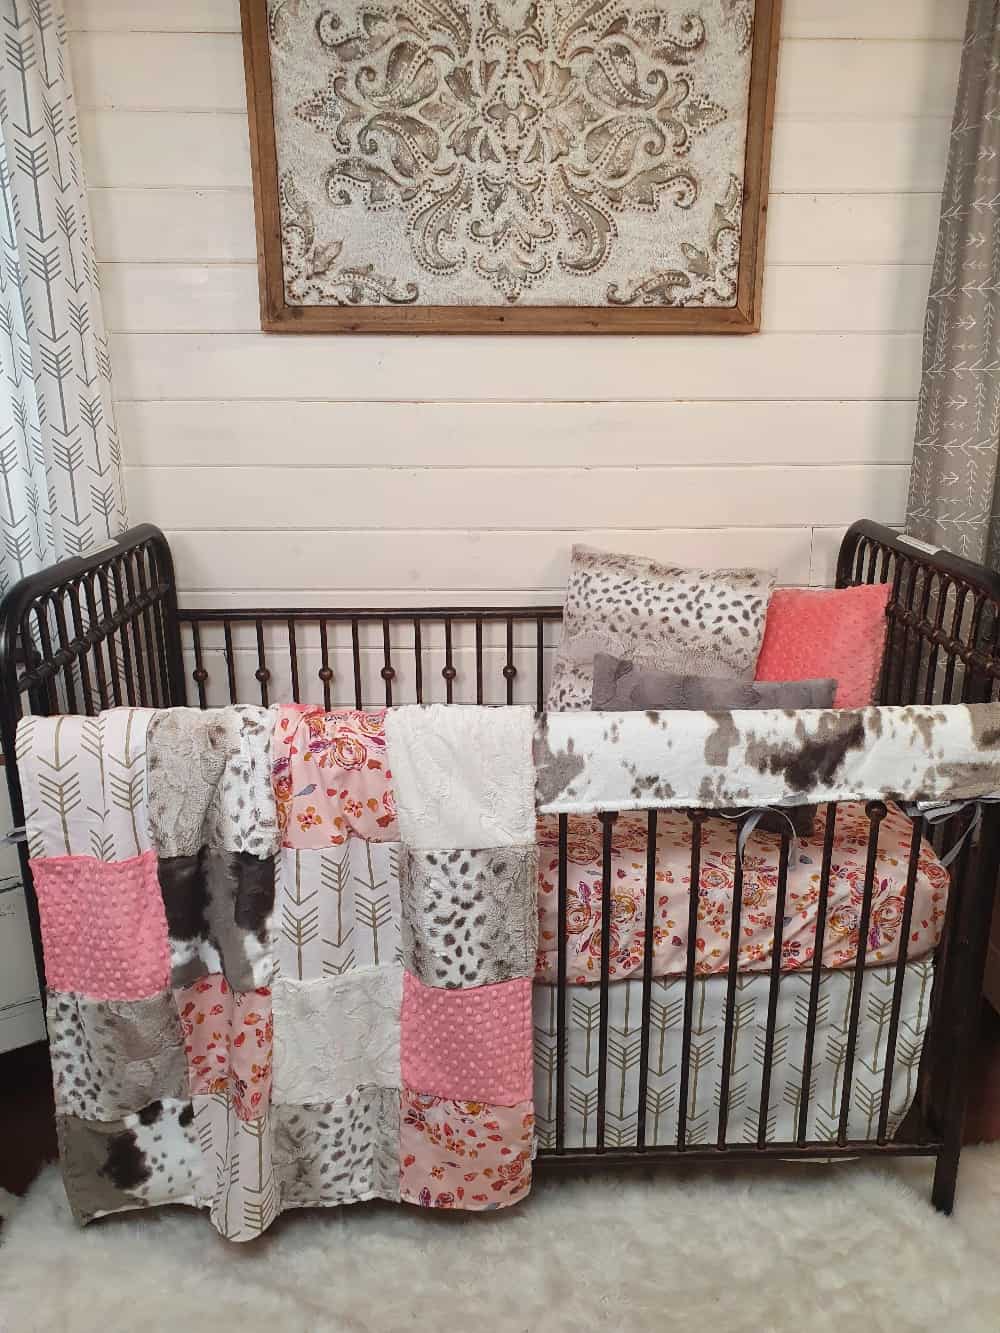 Girl Crib Bedding - Blush Summer Floral and Brown Sugar Cow Minky Ranch Collection - DBC Baby Bedding Co 